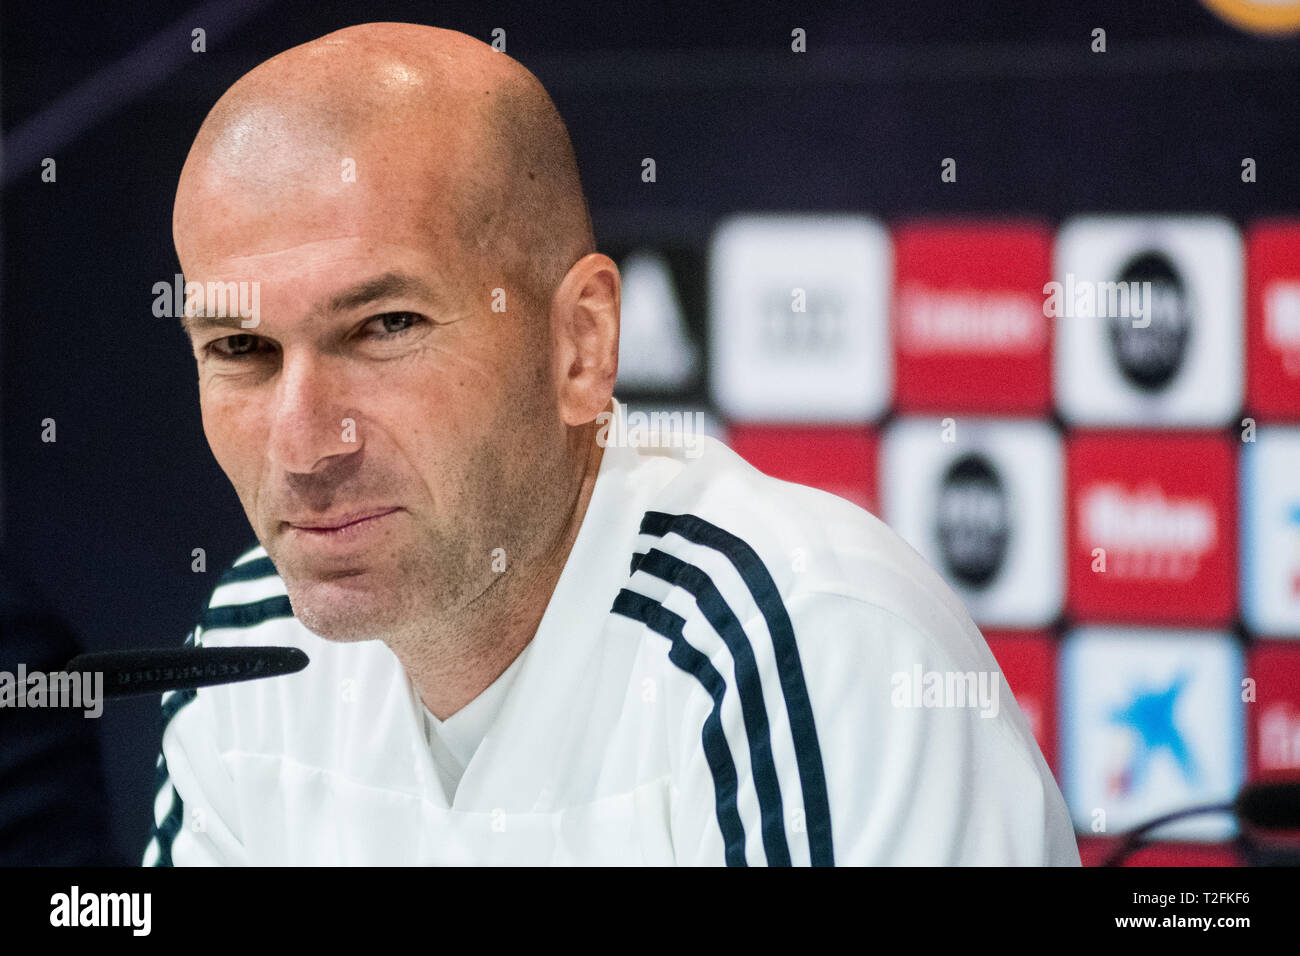 Madrid, Spain. 2nd Apr, 2019. Real Madrid coach Zinedine Zidane during a press conference ahead of La Liga match against Valencia C.F. Credit: Marcos del Mazo/Alamy Live News Stock Photo